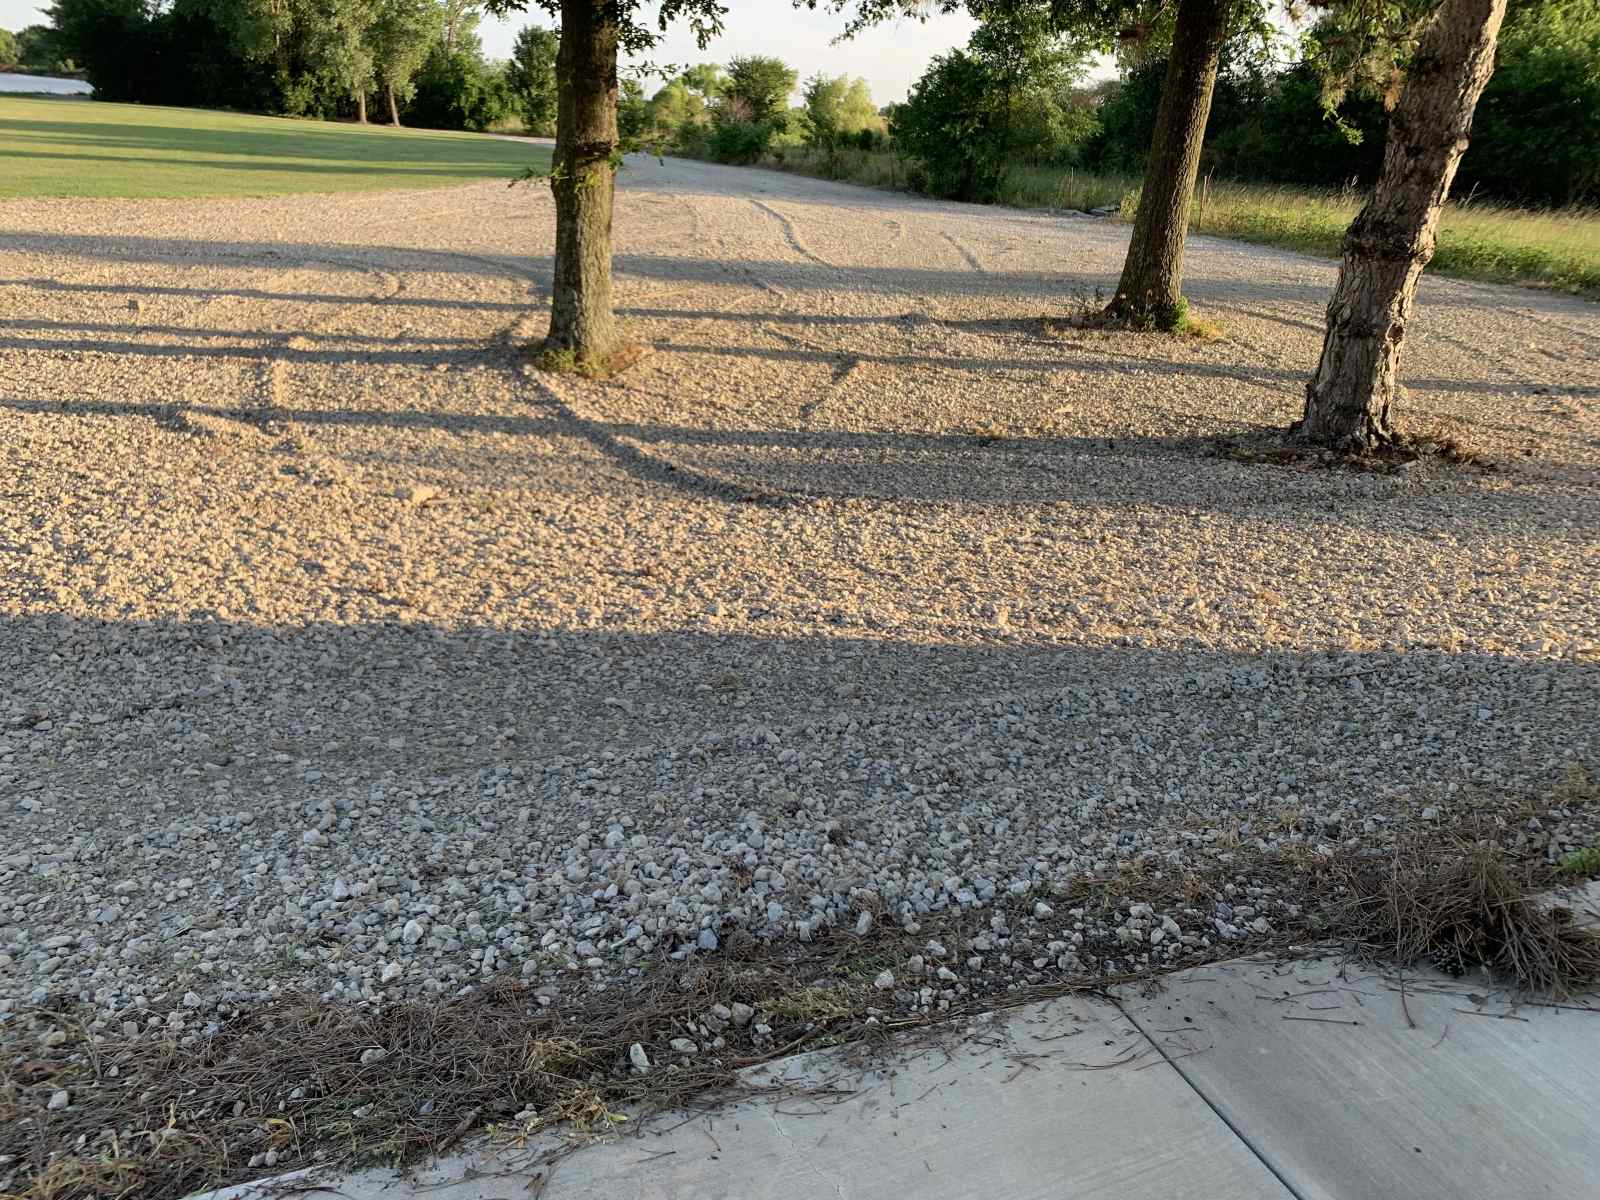 Uncover The Secret To Scoring Free Gravel For Your Driveway!